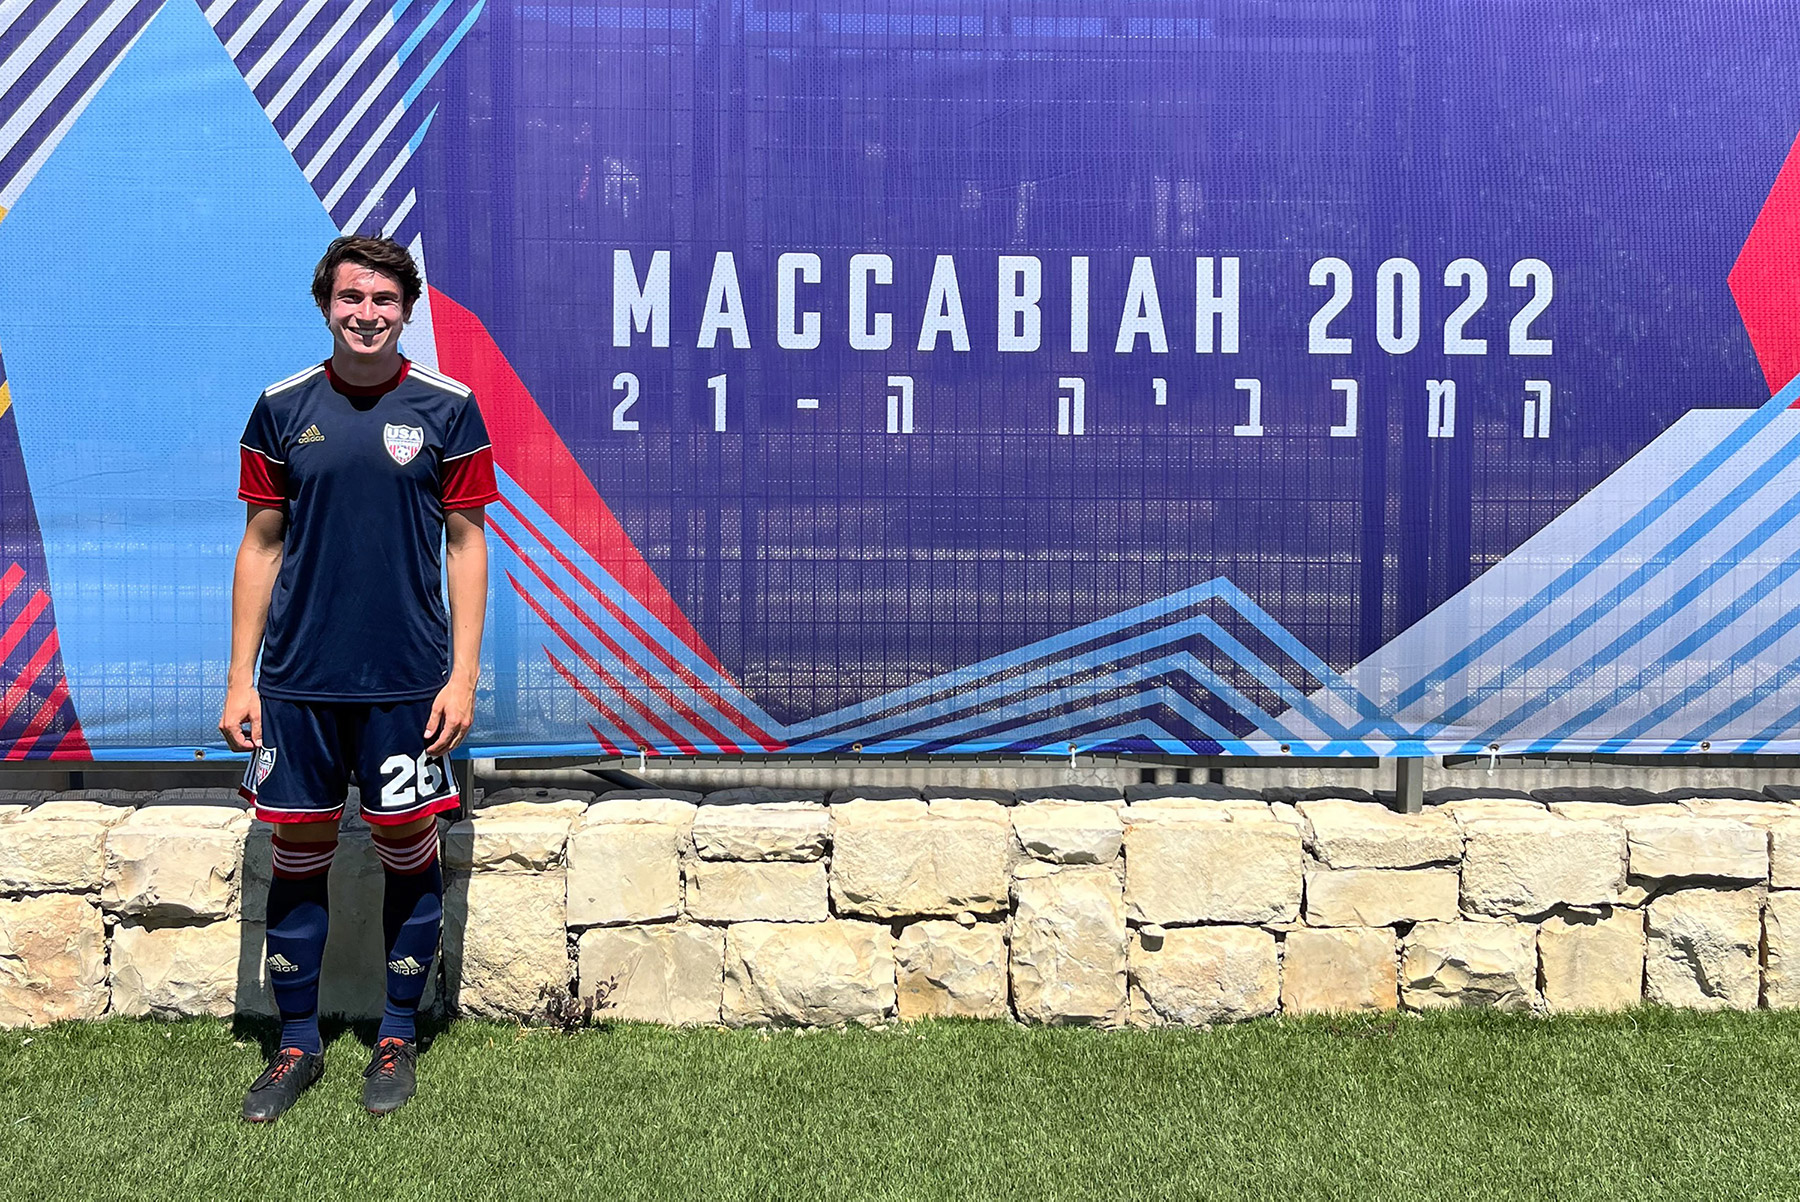 Andrew Goldsmith ’25 helped Team USA win a silver medal at the 21st Maccabiah Games.